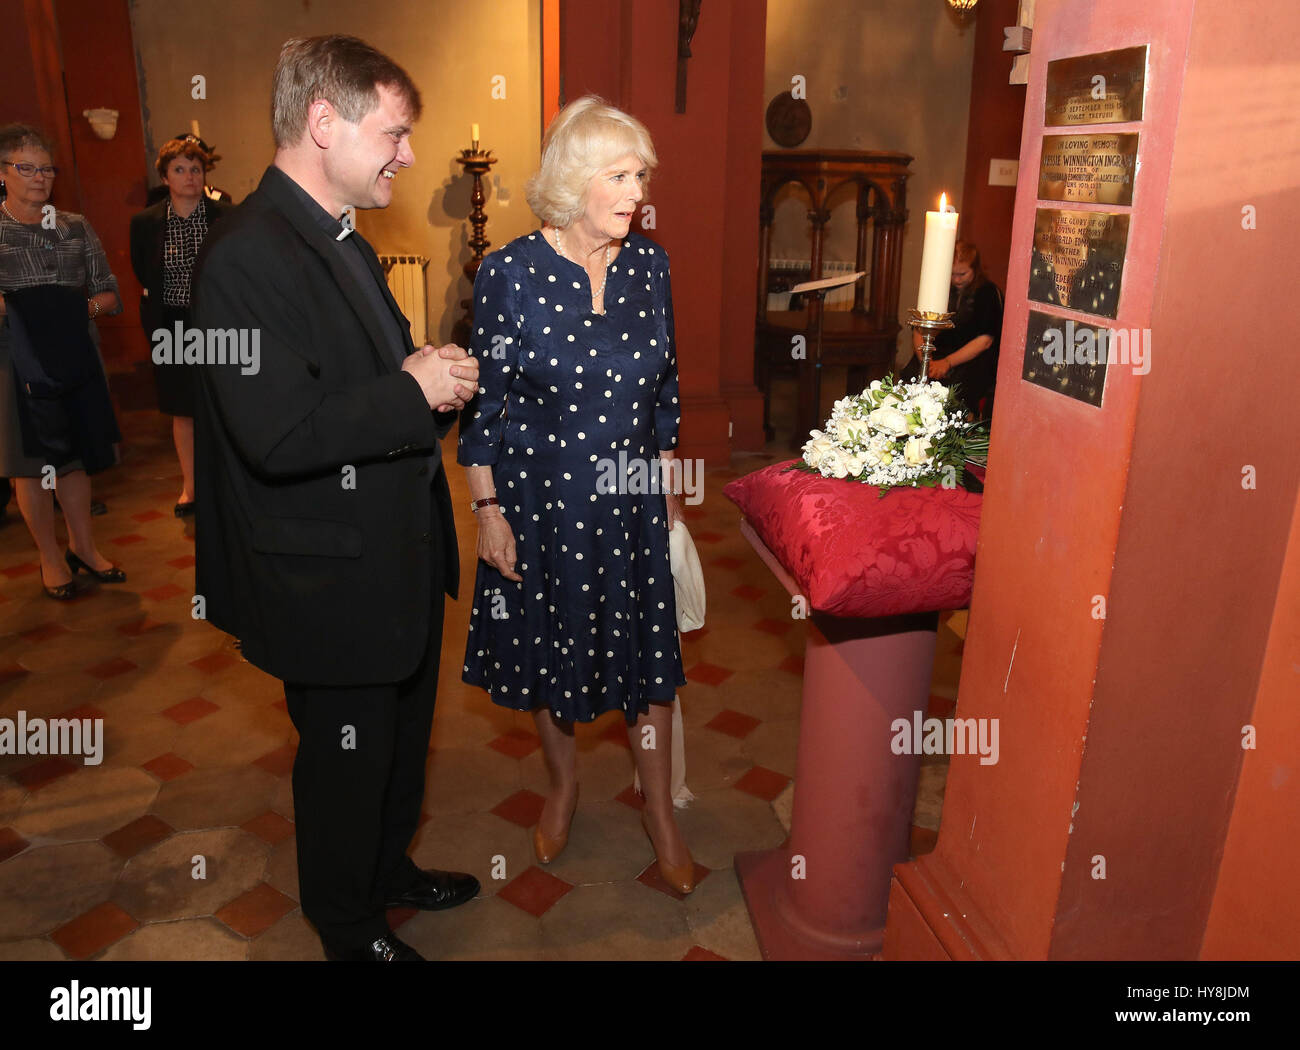 The Duchess of Cornwall with the Reverend William Lister, Chaplain Area Dean for Italy and Malta (left) during a visit to St Mark's Anglican Church in Florence, Italy, where she lay flowers at a memorial plaque in honour of Alice Keppel, the Duchess of Cornwall's great-grandmother. Stock Photo